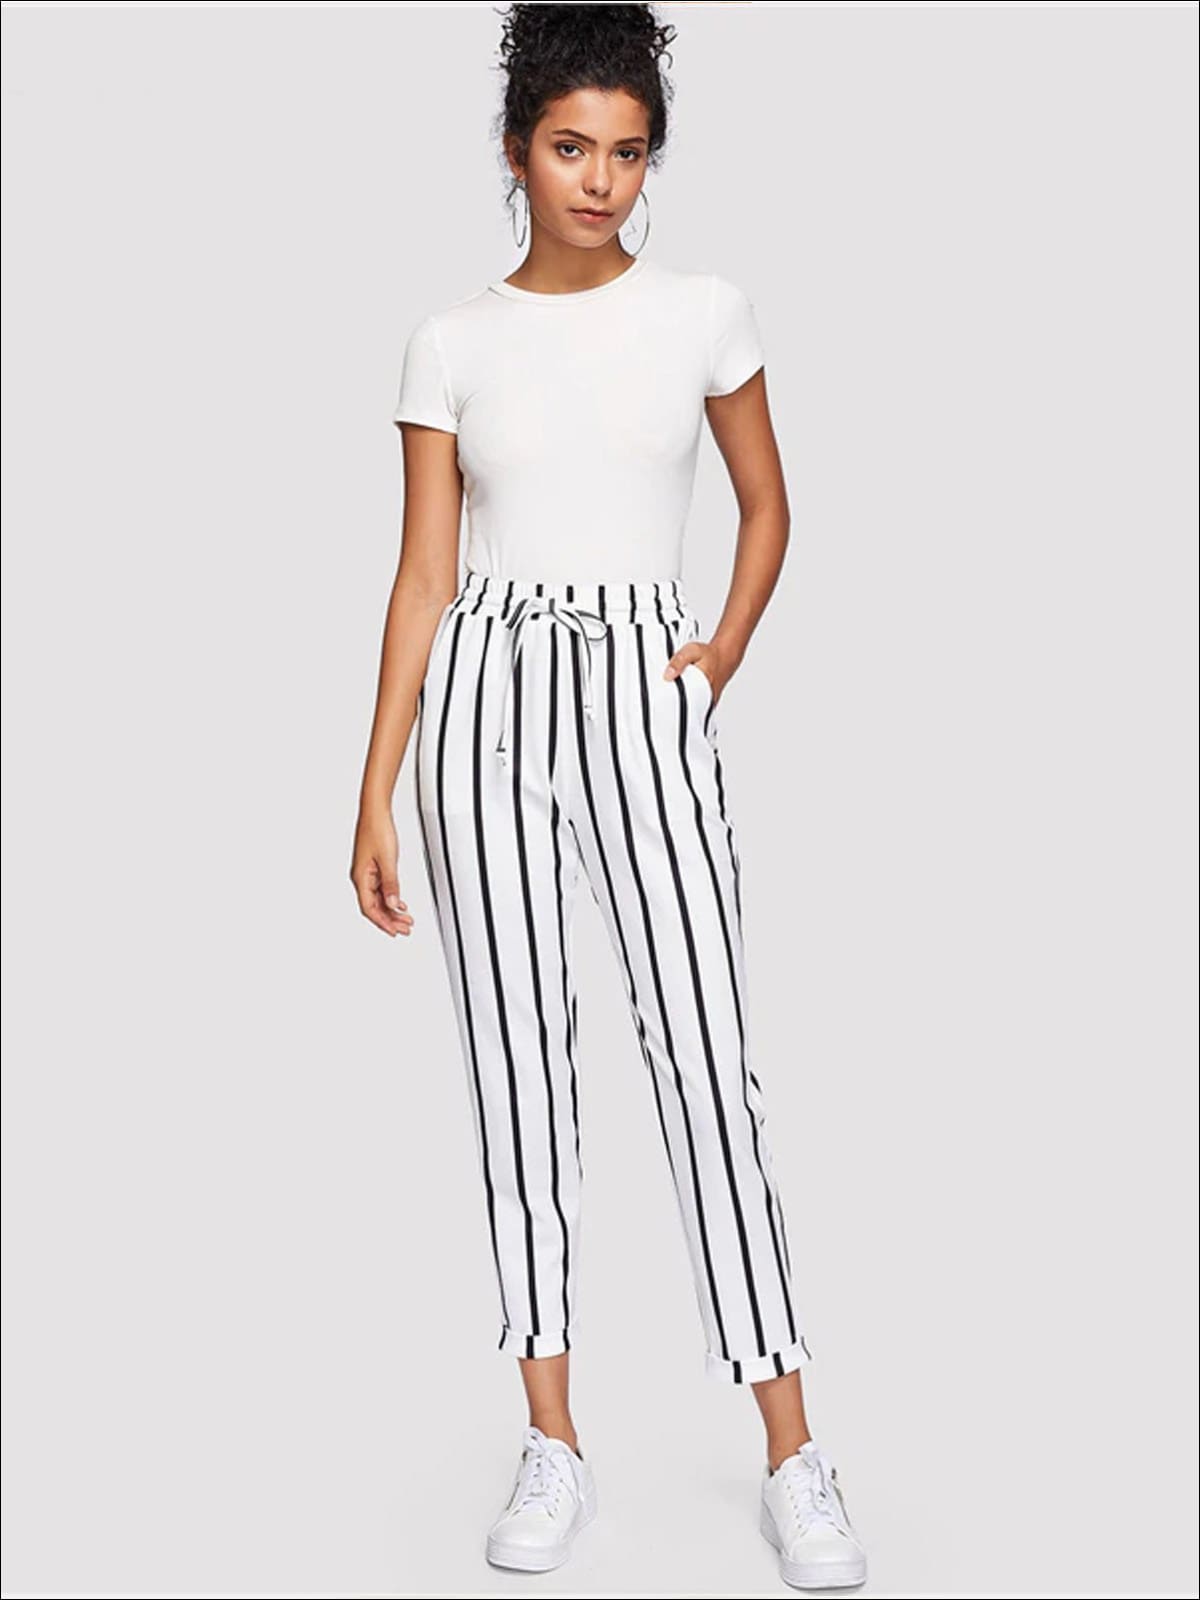 https://cdn.shopify.com/s/files/1/0996/1812/products/womens-striped-drawstring-waist-tapered-pants-with-folded-hem-detail-40-59-99-bfcutoff-dropified-dropshipping-mia-belle-overseas-fulfillment-bottoms-baby_265.jpg